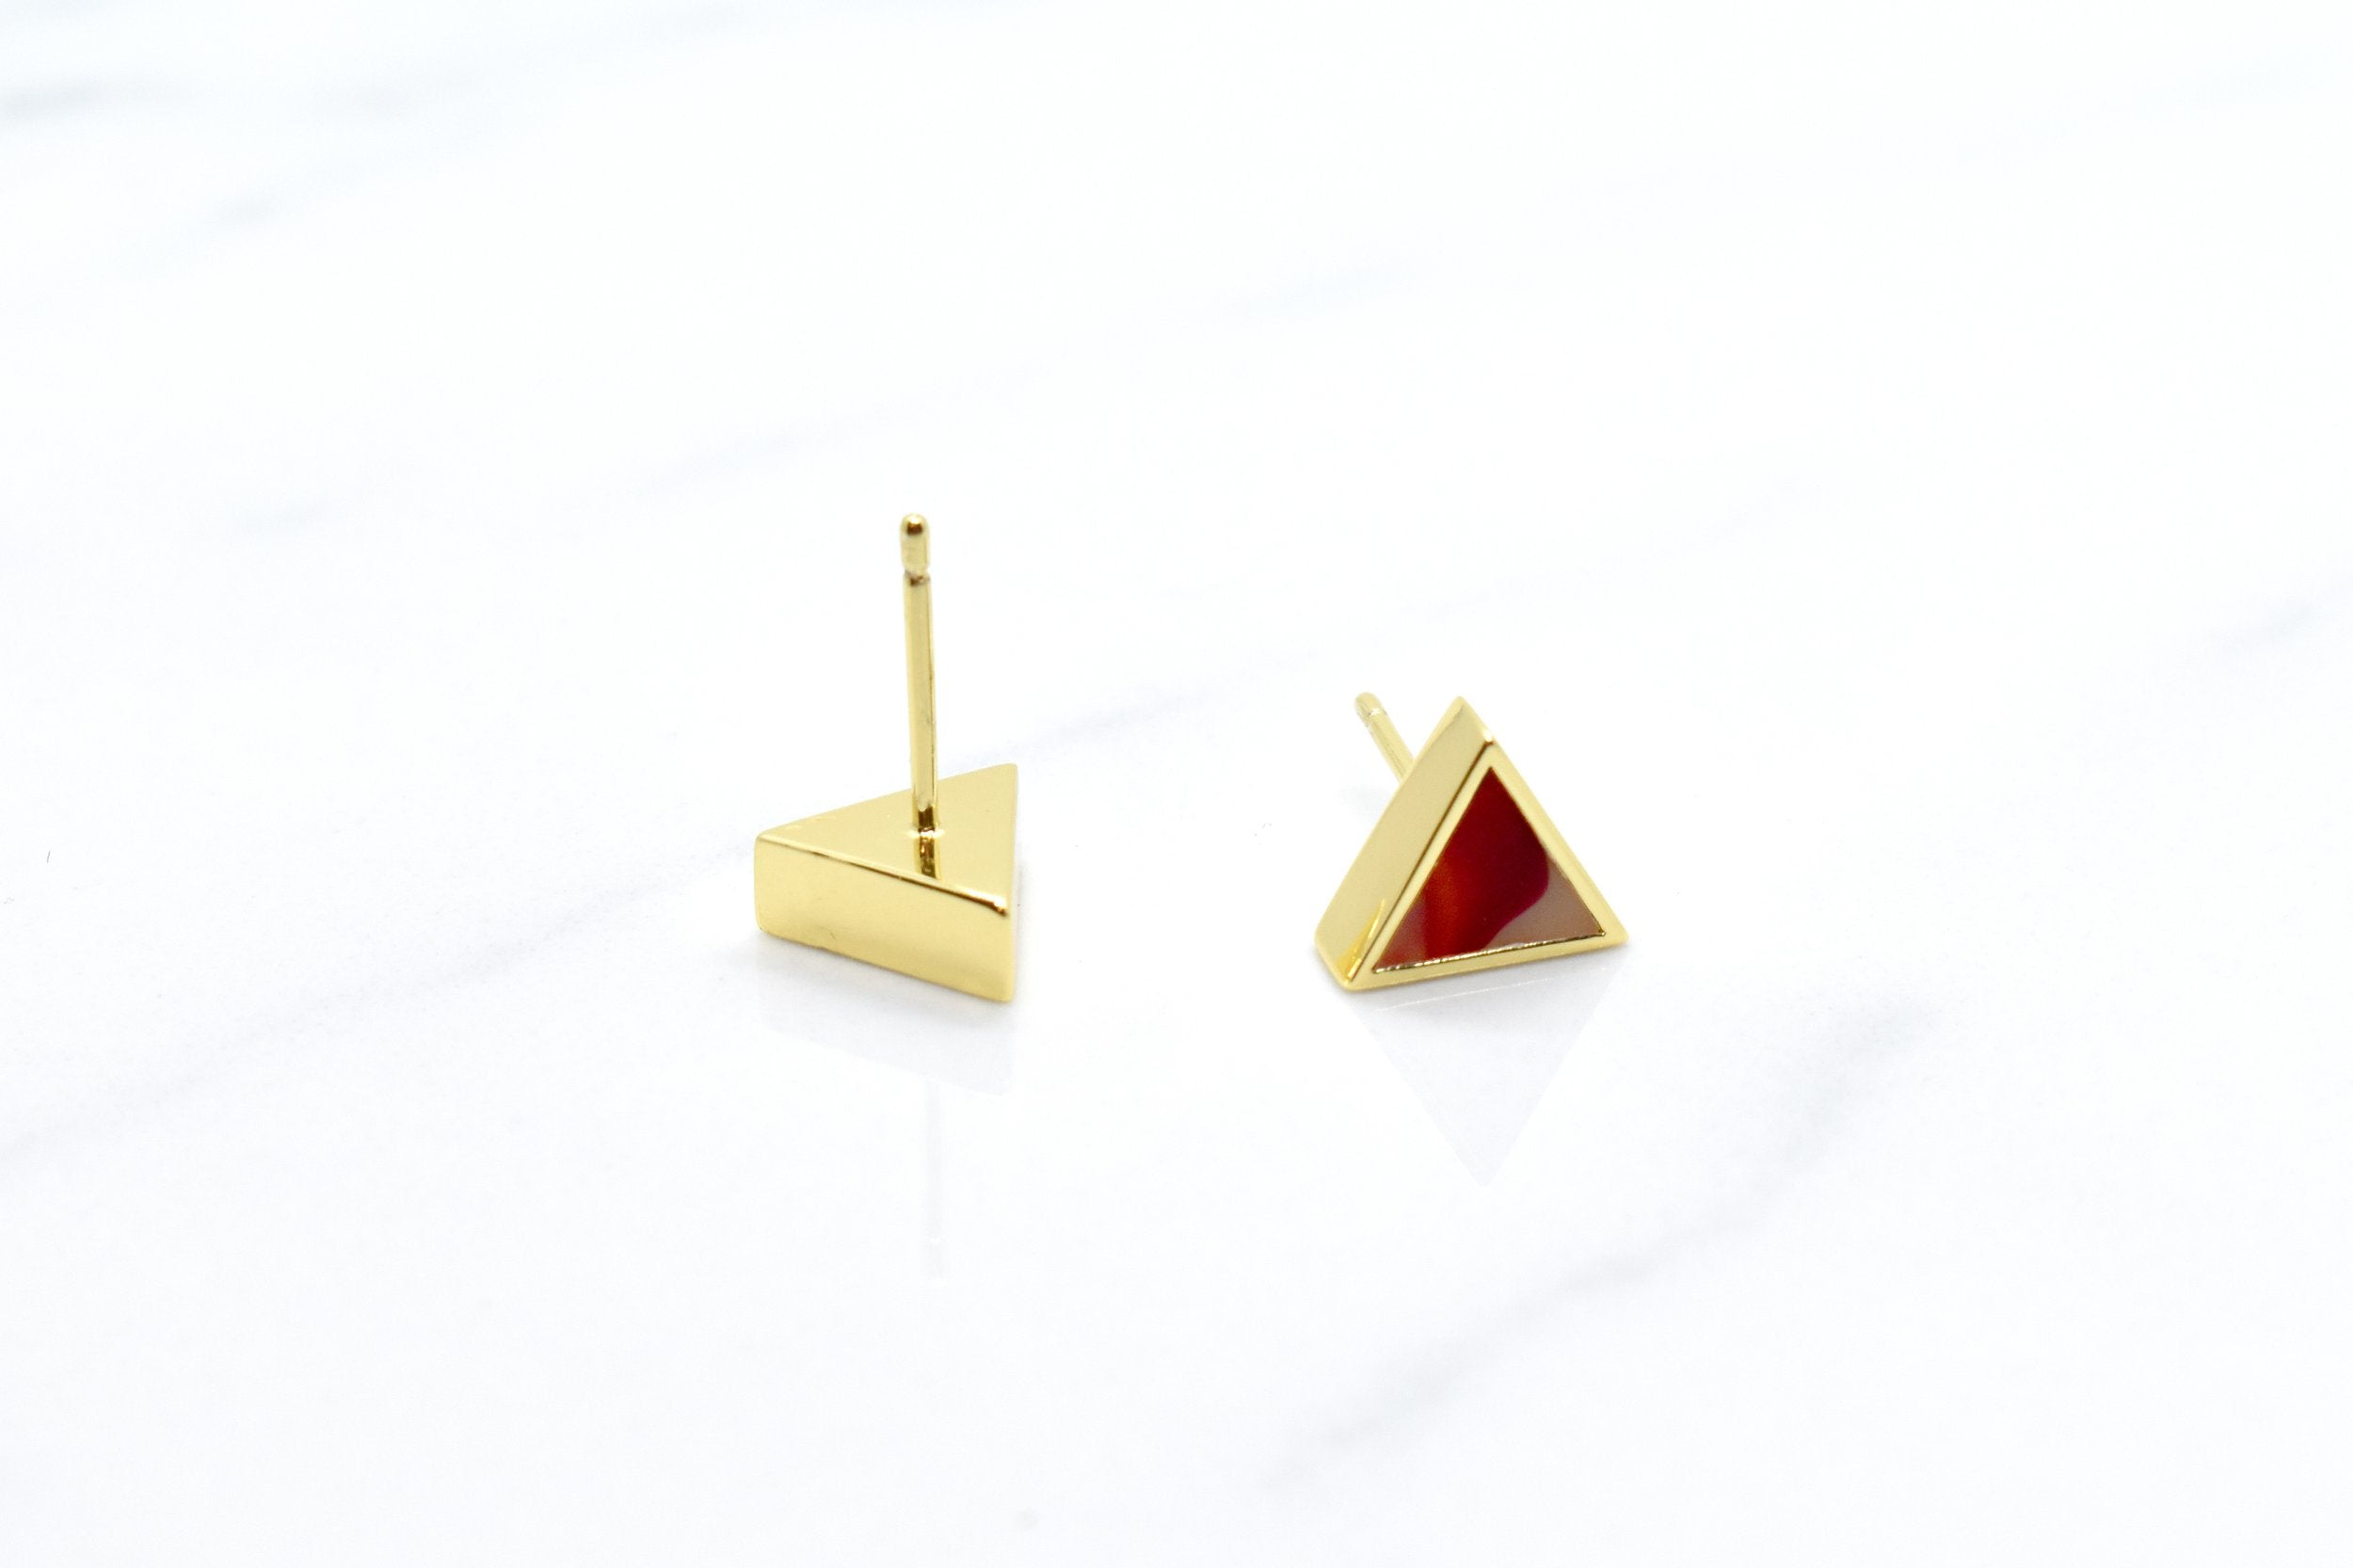 geometric triangle stud earrings in ruby red showing the backside where you can see the surgical steel posts that are hypoallergenic and good for sensitive ears